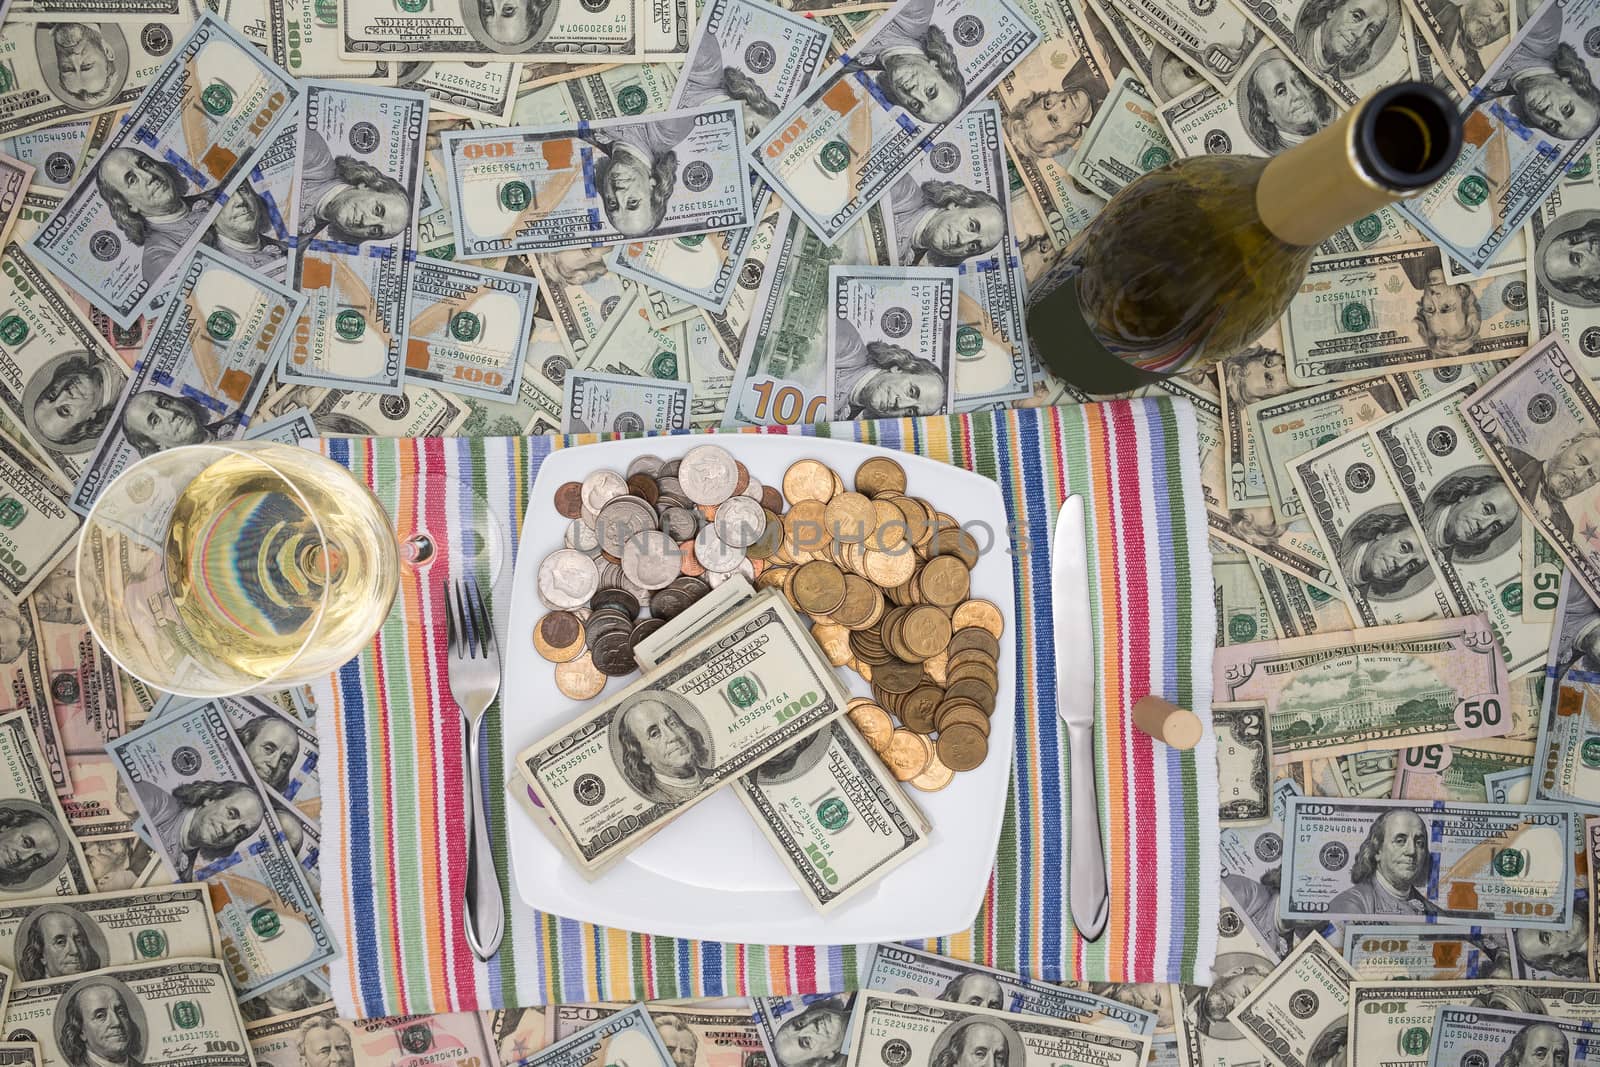 Conceptual financial image of a plate of money with cutlery flanked by a bottle and glass of champagne on a background of 100 dollar bills depicting eating money through greed and extravagance